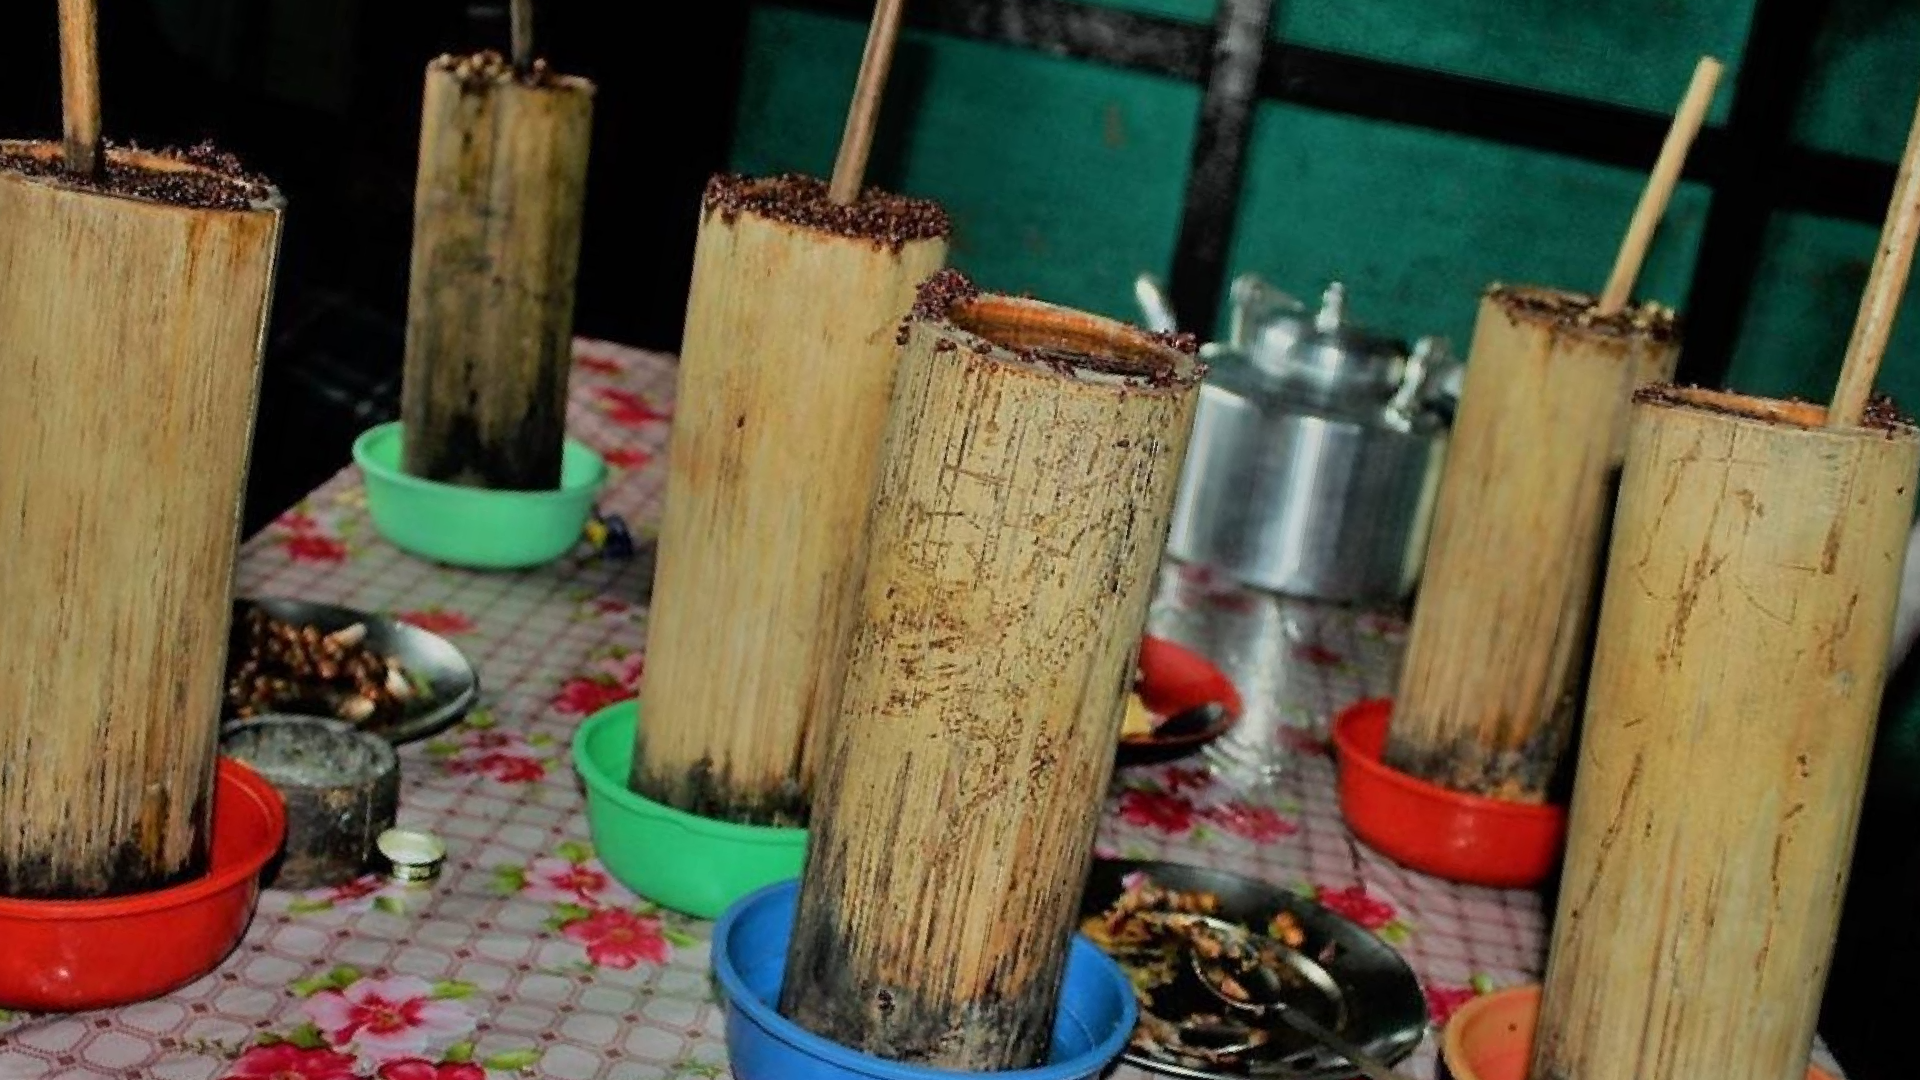 Of nature, culture and alcohol: A glimpse into Sikkim’s age-old brewing traditions